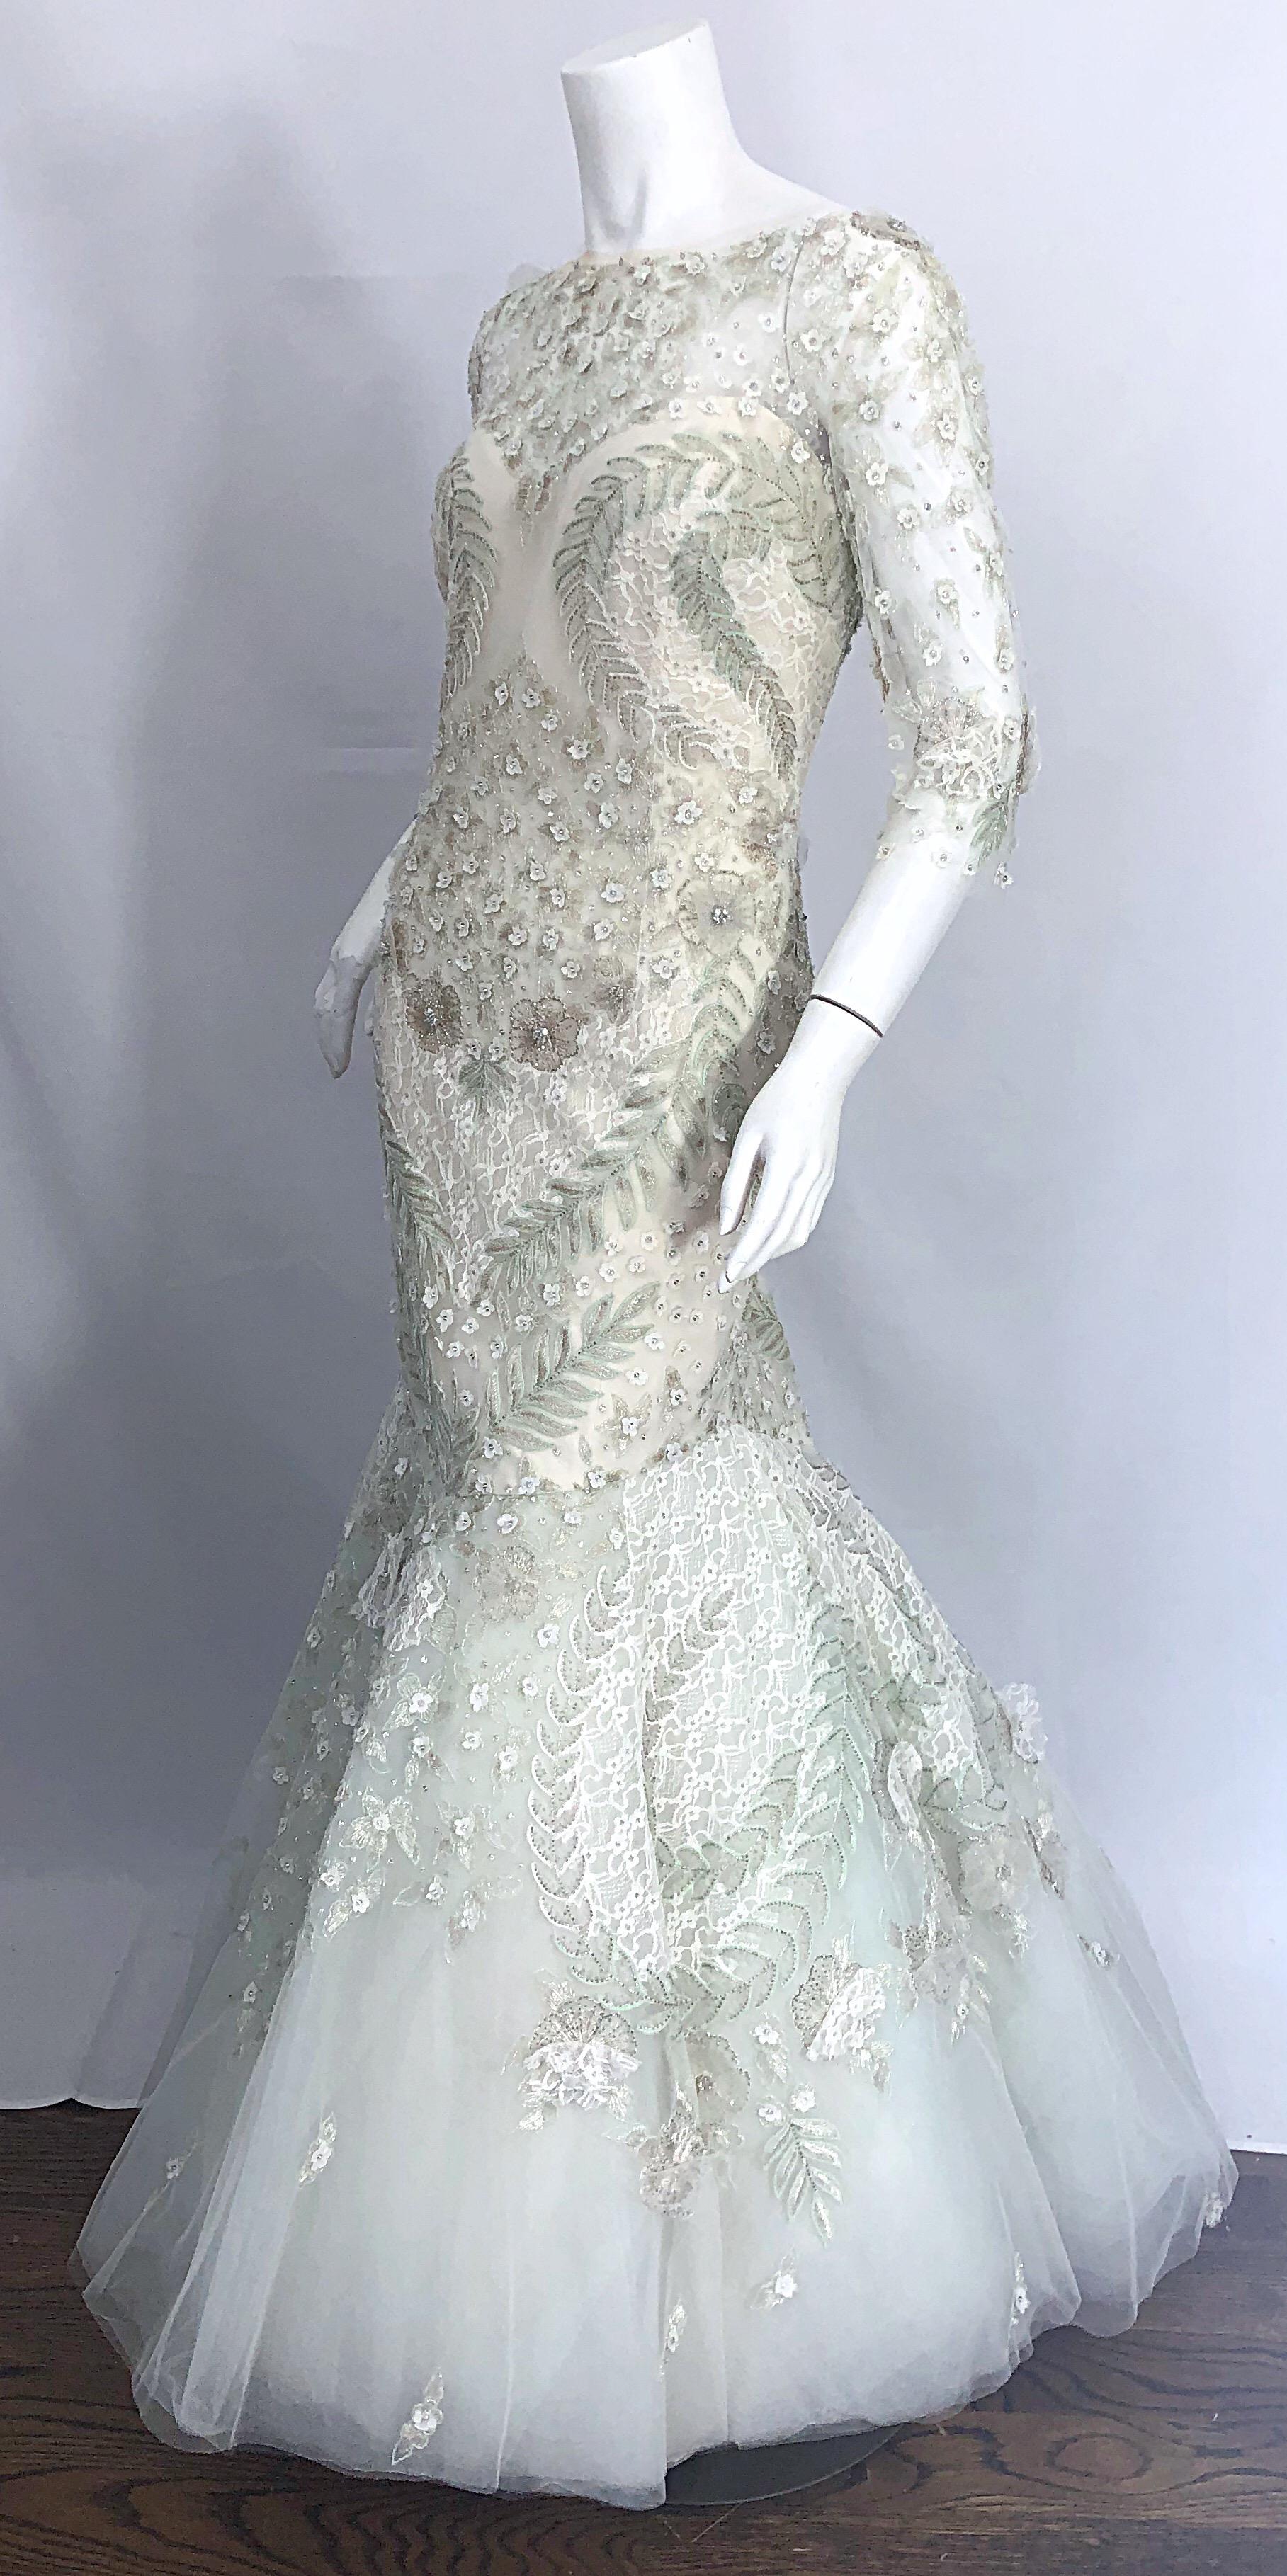 Monique Lhuillier Size 14 Mint Green Ivory Beaded Sequined Mermaid Gown Dress In Excellent Condition For Sale In San Diego, CA